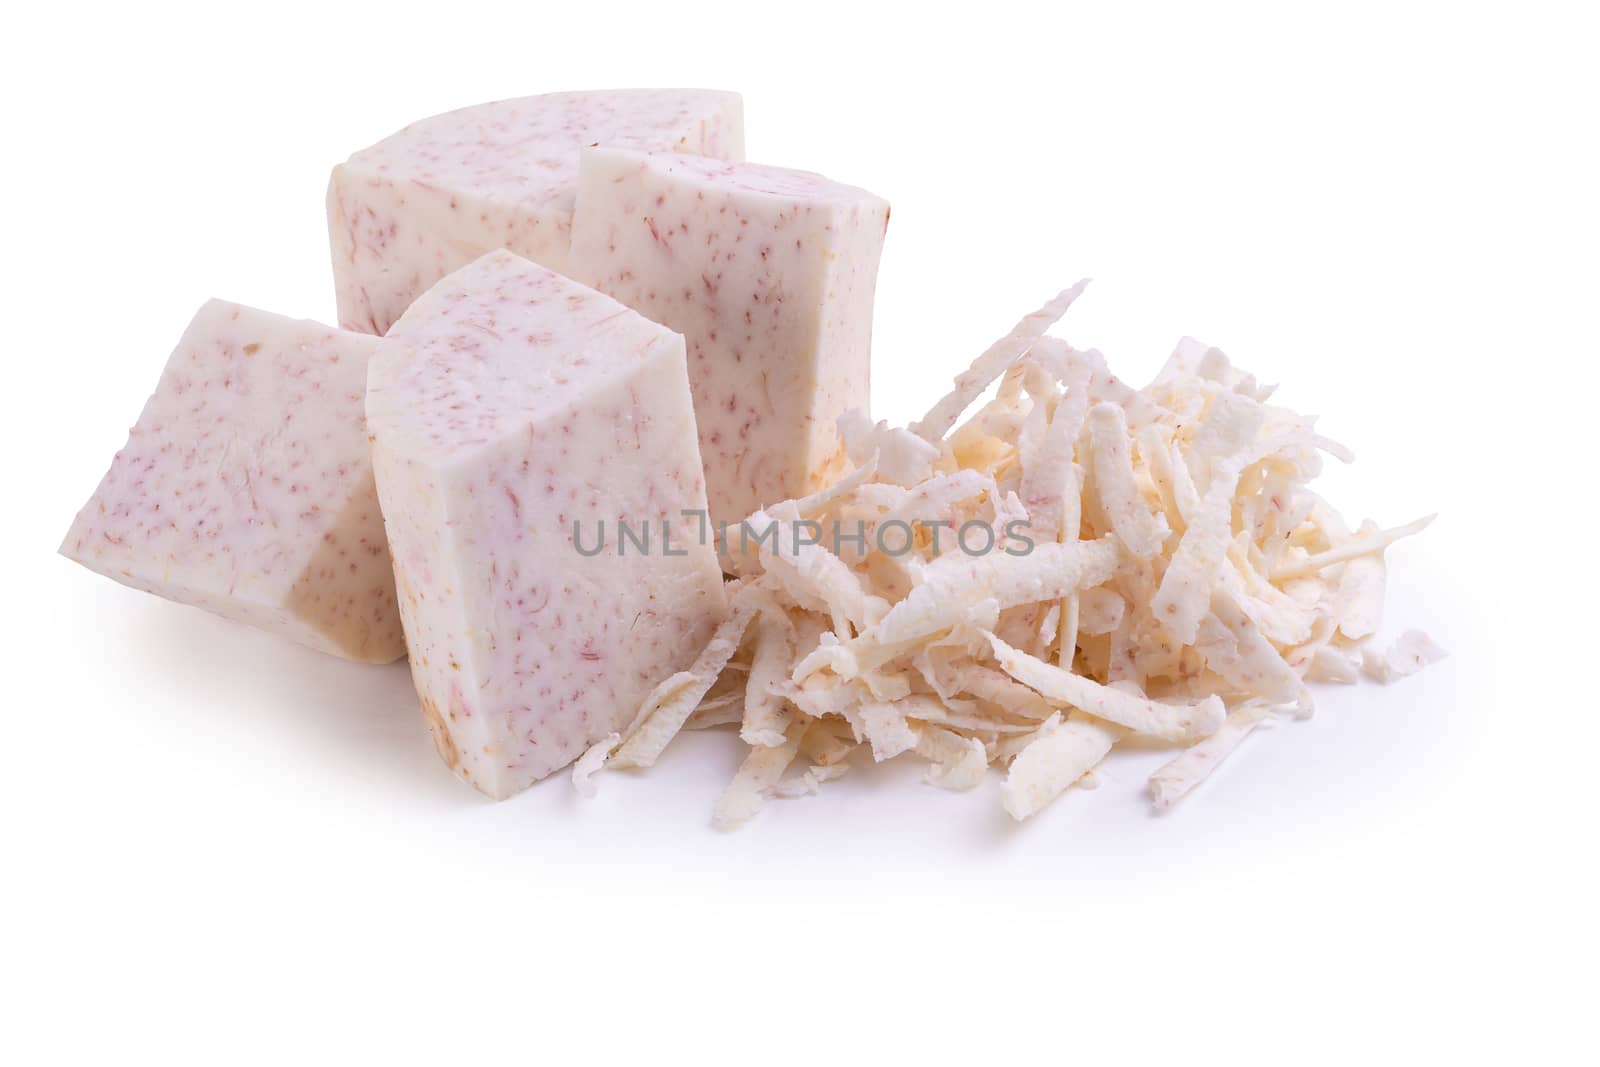 slice and cubes of taro root isolated on a white background